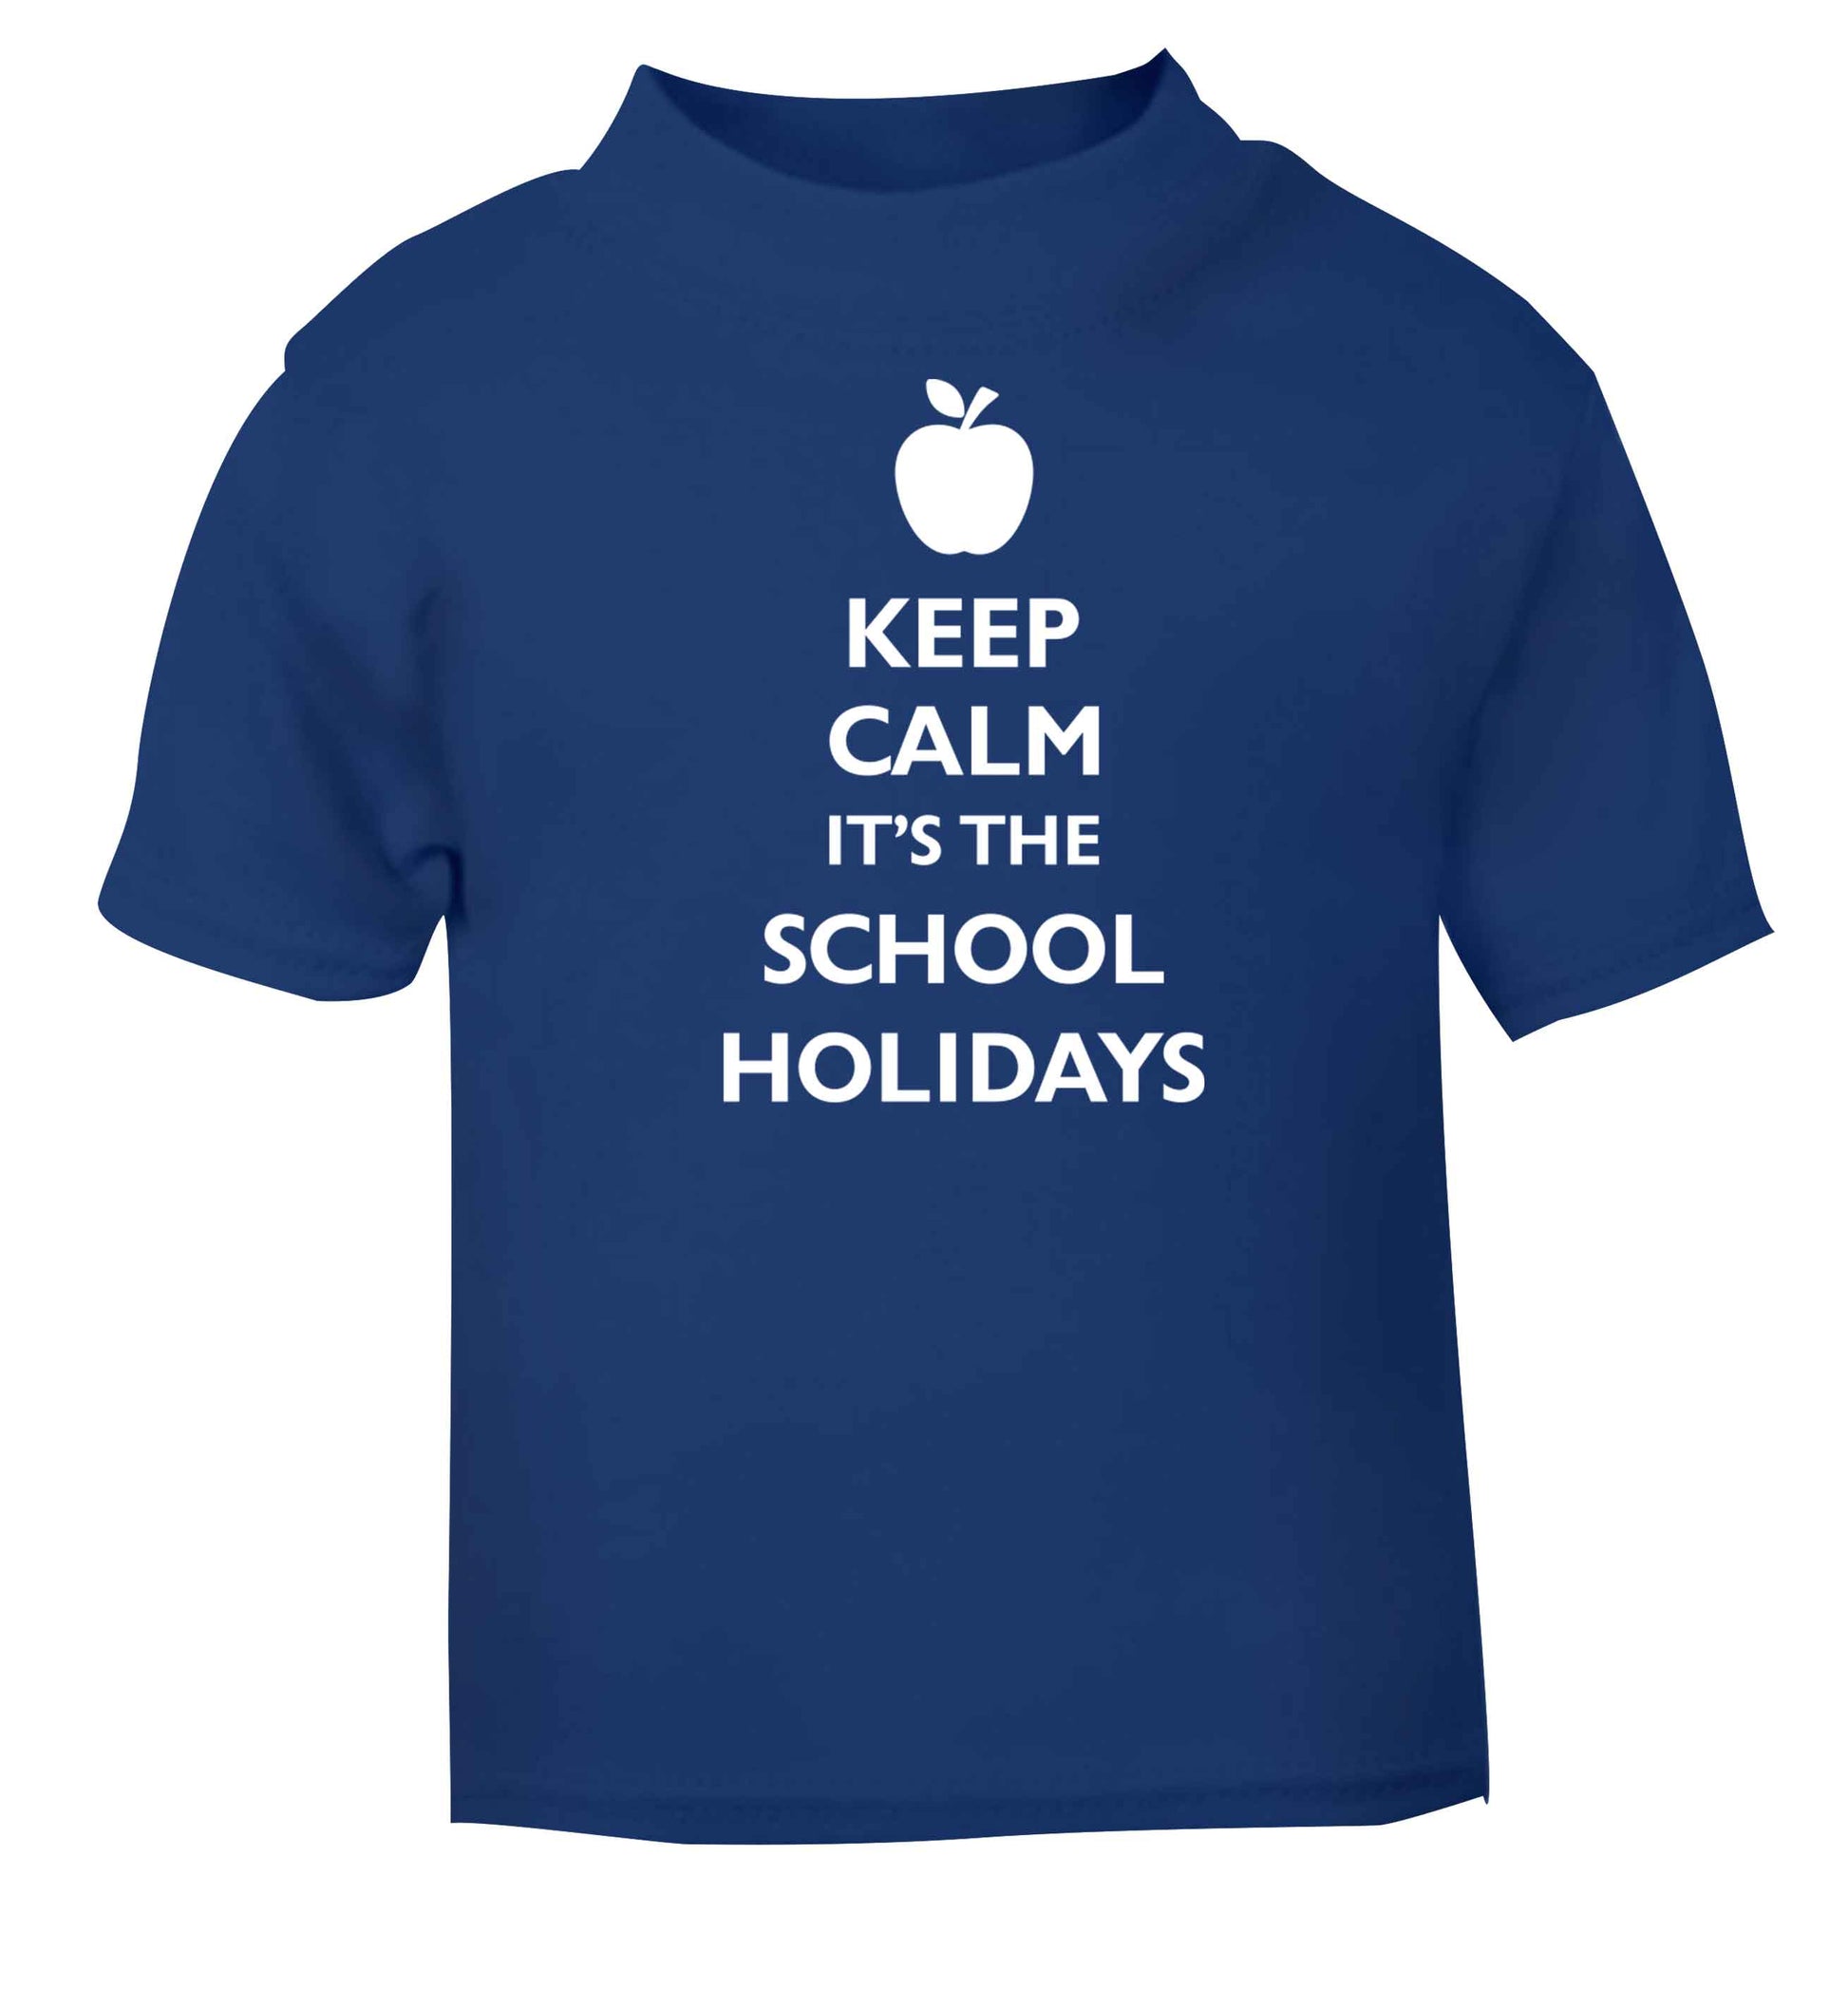 Keep calm it's the school holidays blue baby toddler Tshirt 2 Years